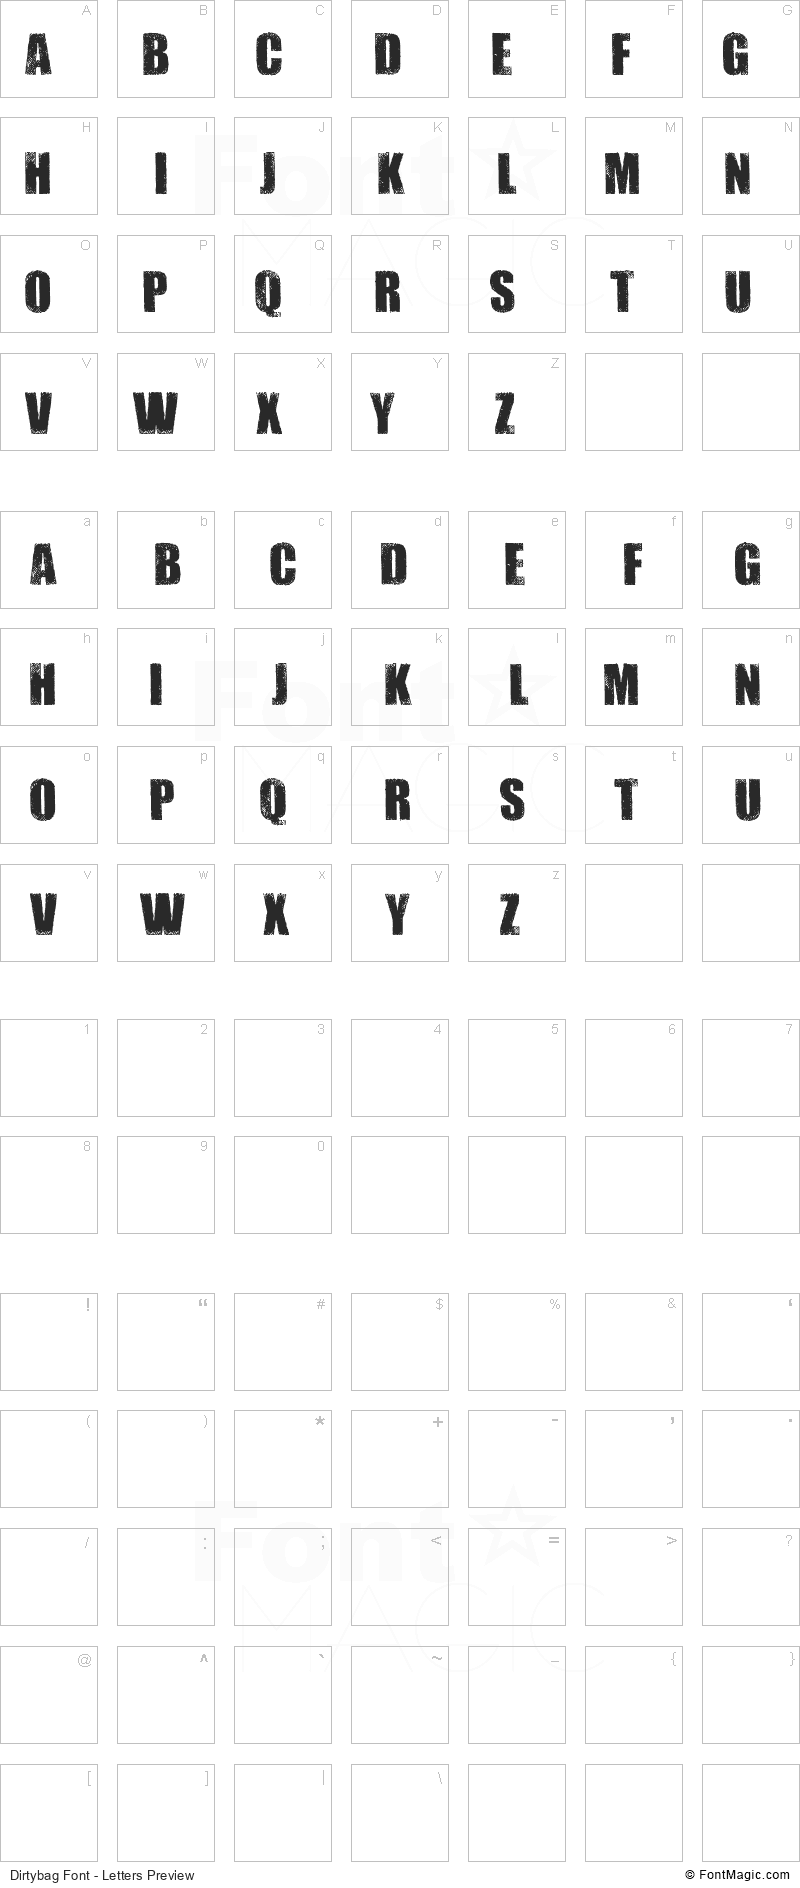 Dirtybag Font - All Latters Preview Chart